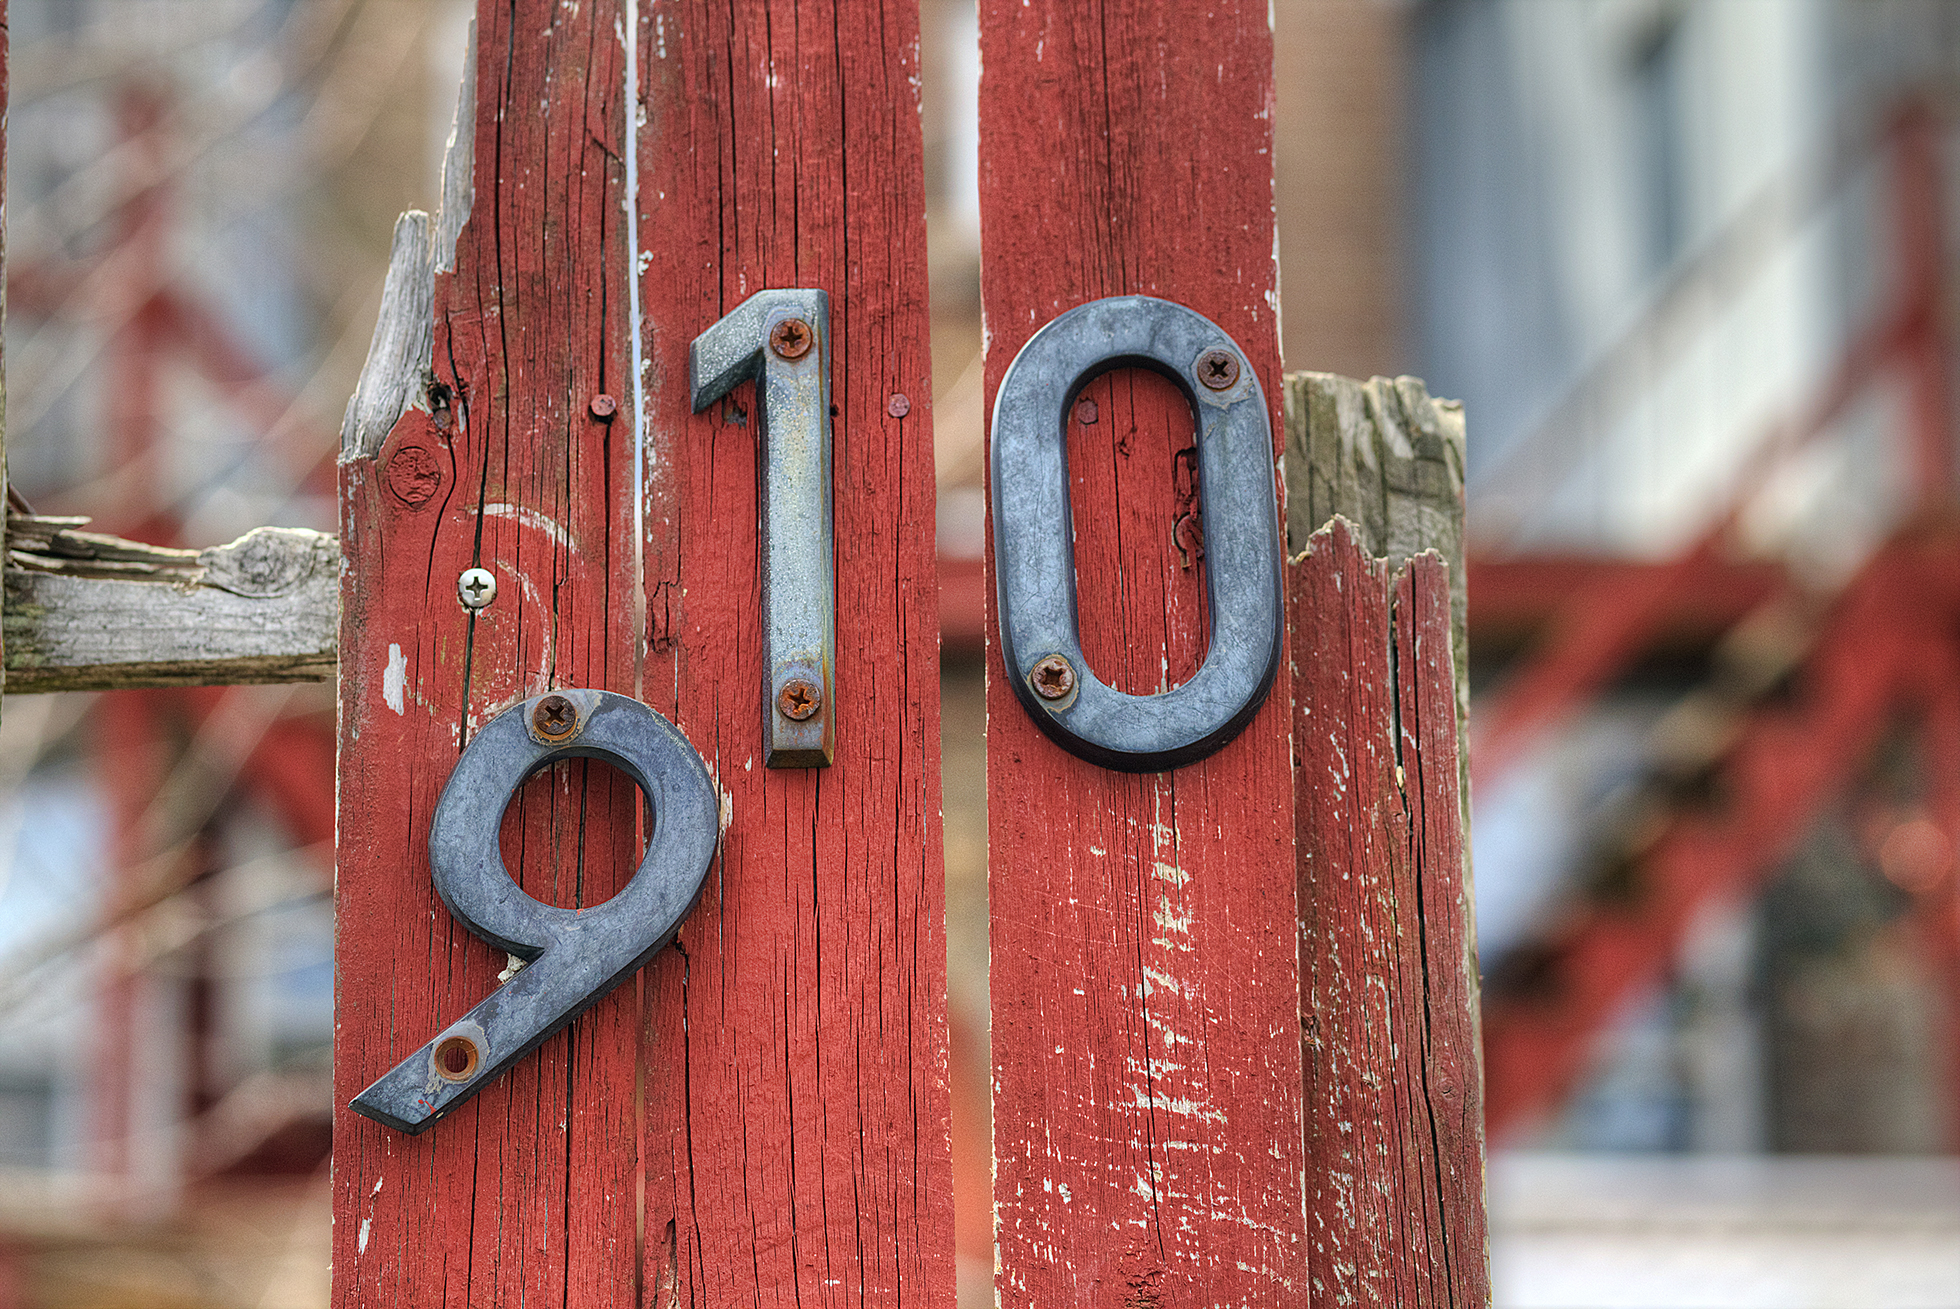 Beat up red fence with steel house numbers falling off